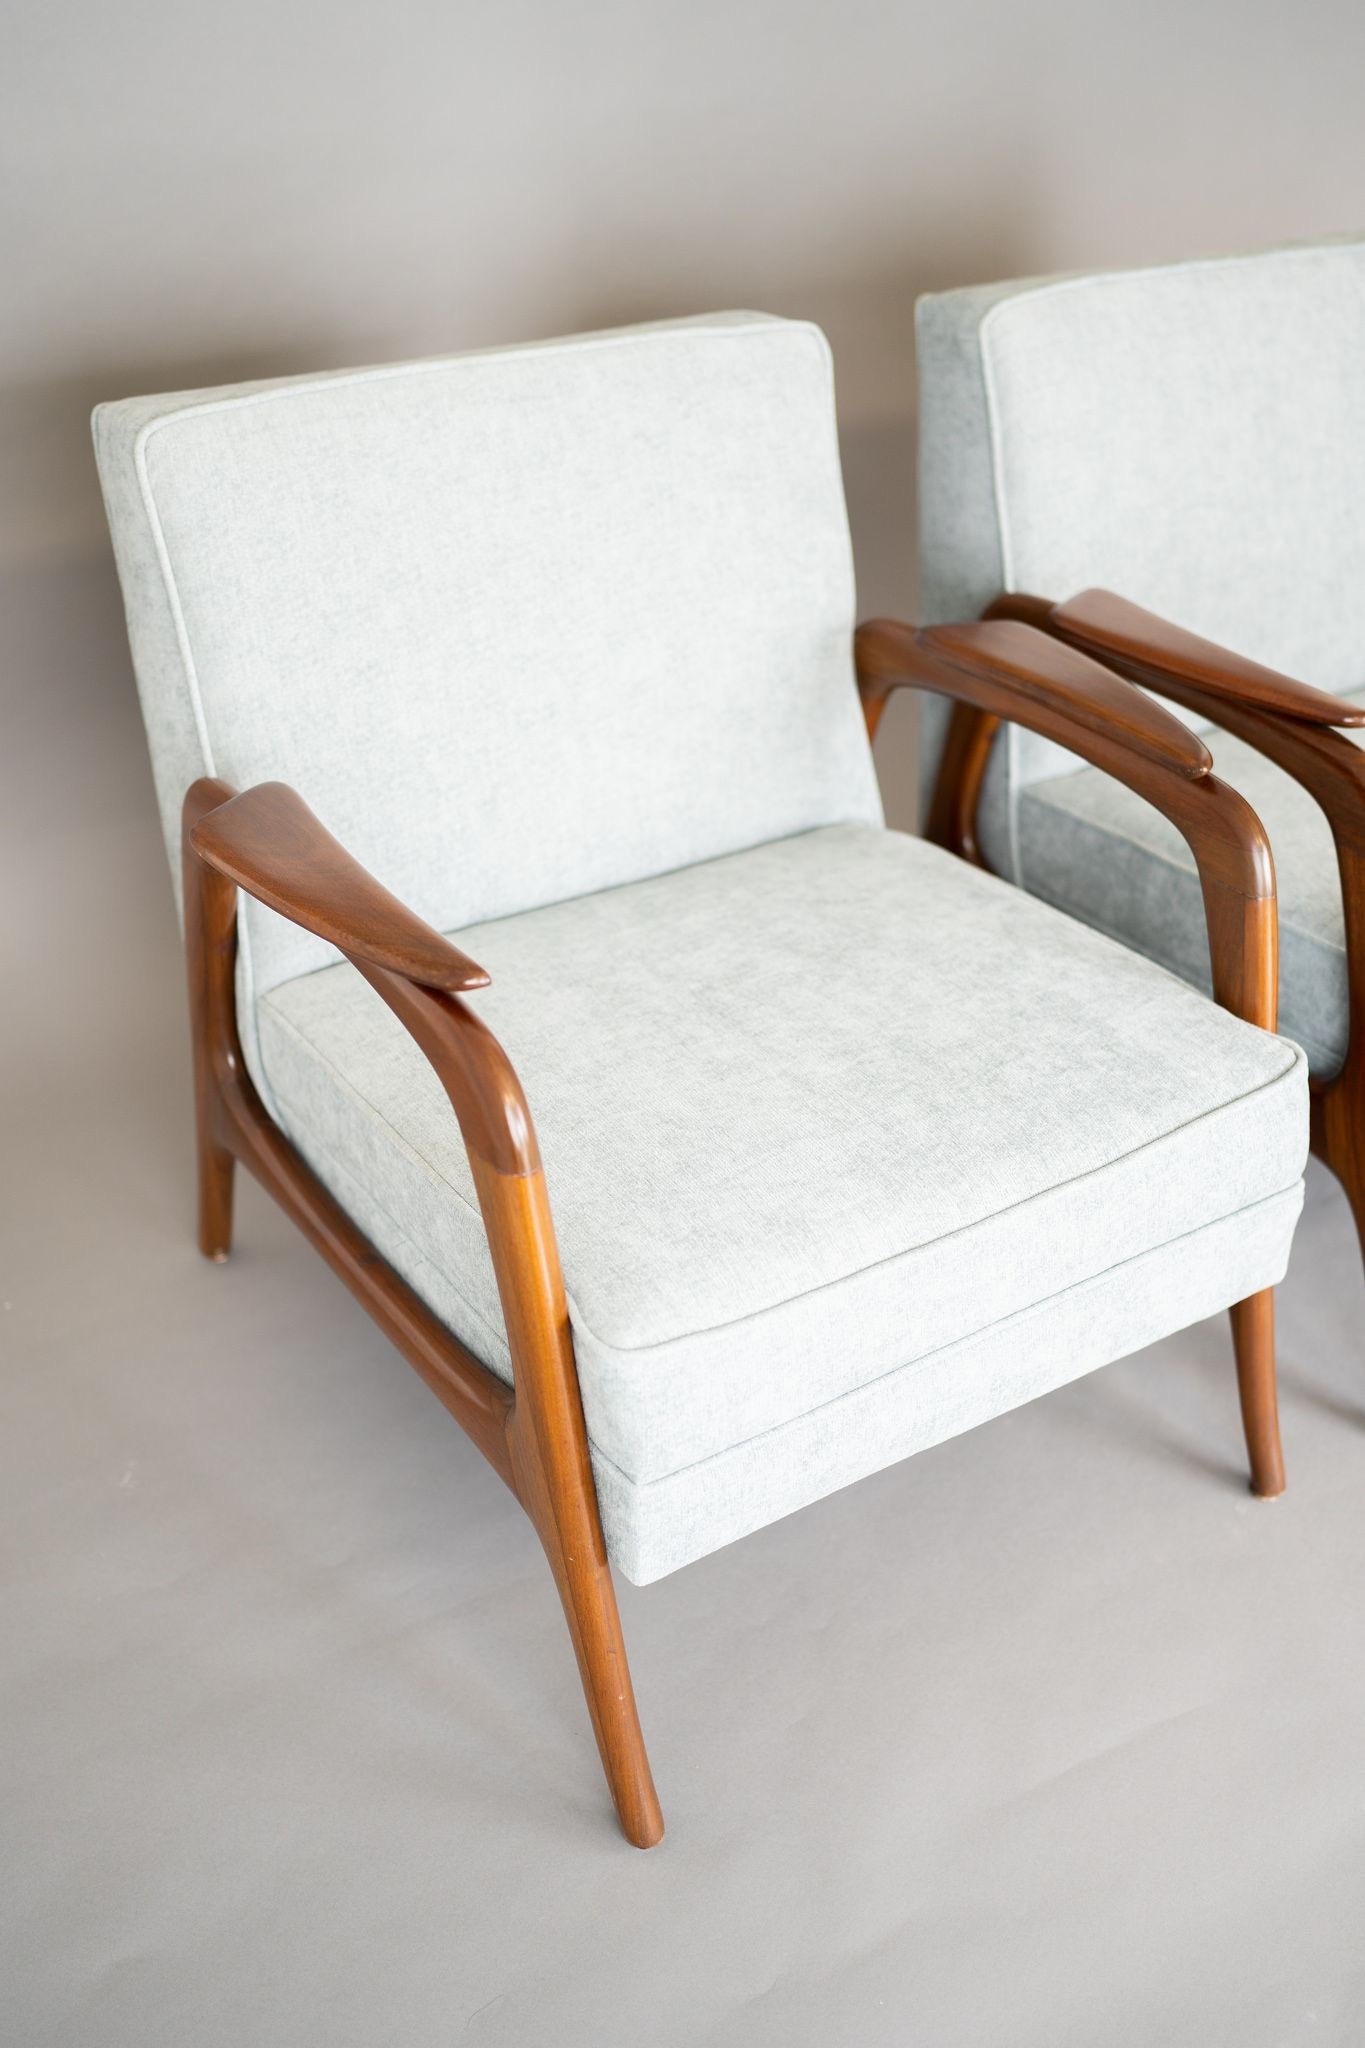 Set of two armchairs, design by the Spanish designer and fervent admirer of Gio Ponti who settled in Mexico, Eugenio Escudero is cataloged one of the greatest icons of Mexican modernism.